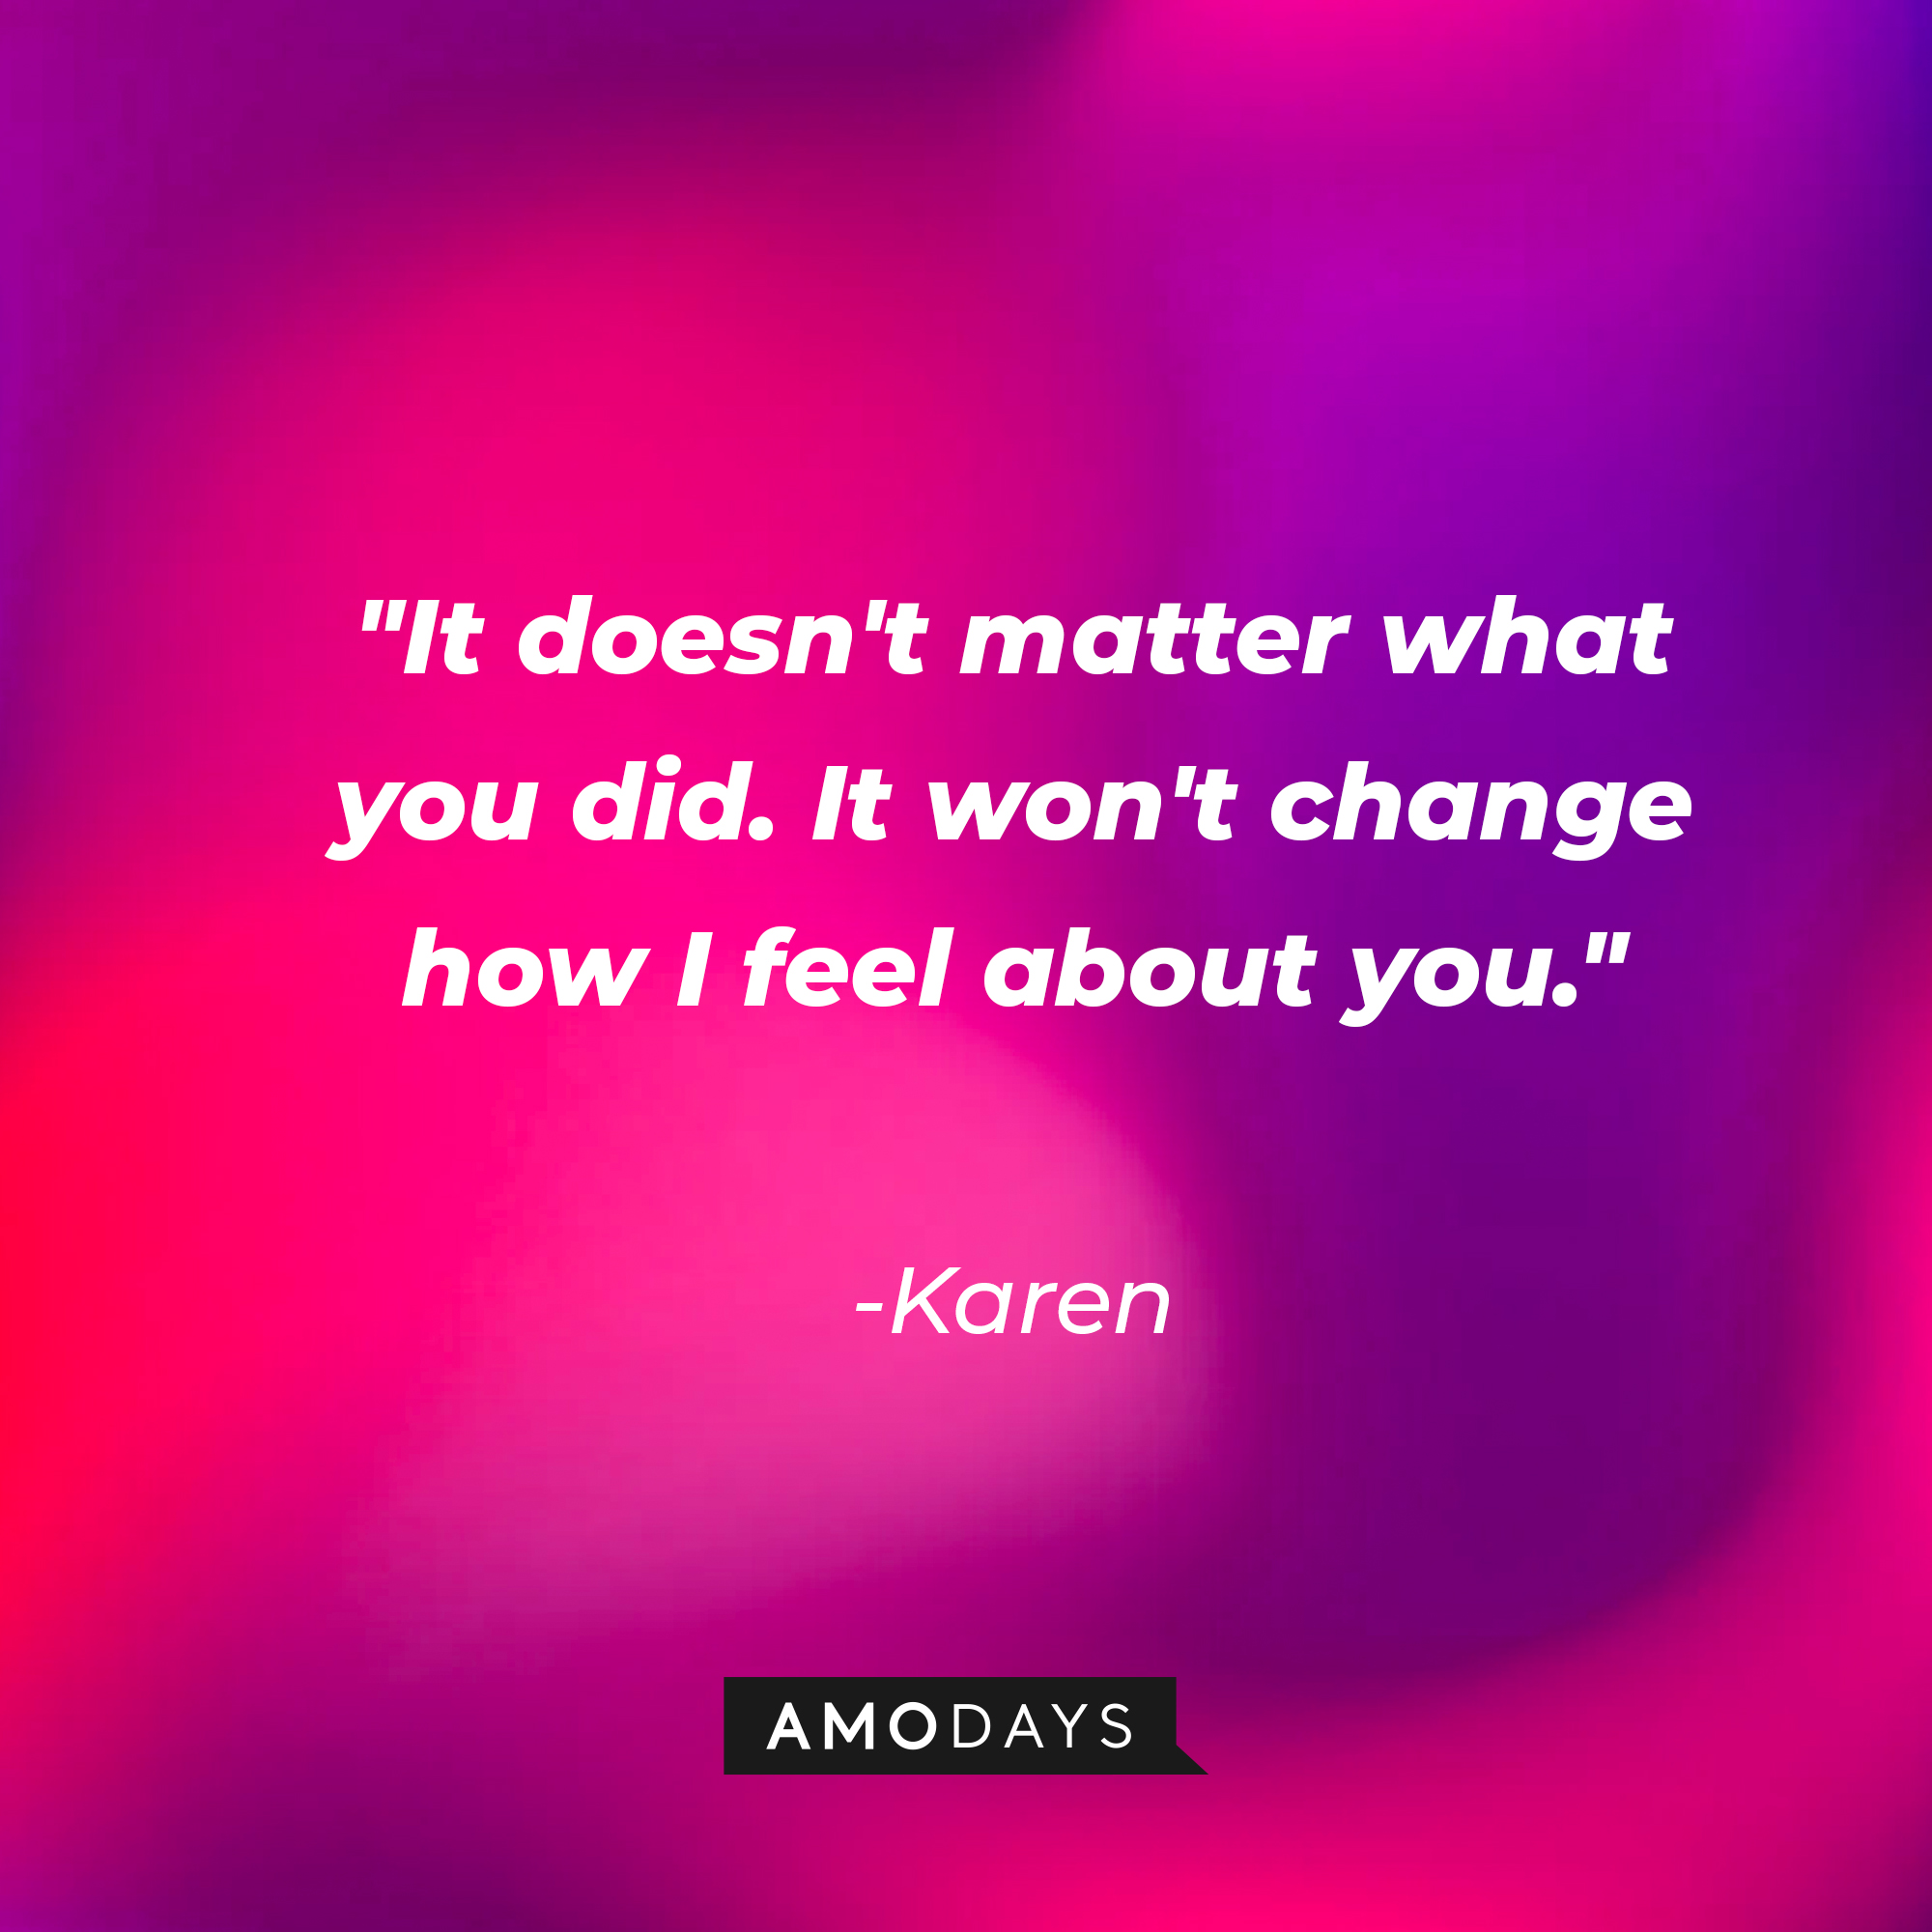 Karen's quote: "It doesn't matter what you did. It won't change how I feel about you." | Source: AmoDays